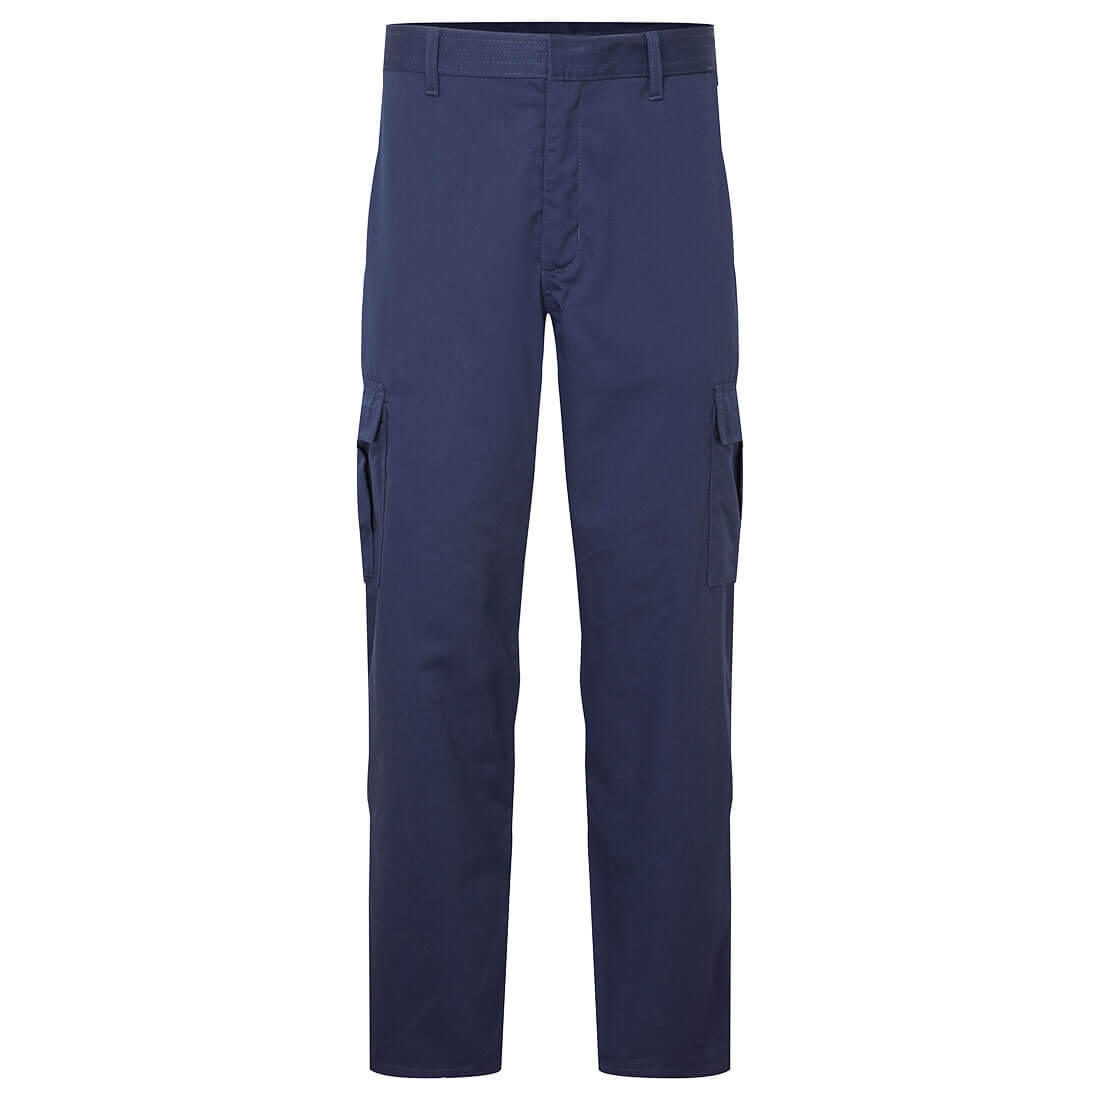 Portwest AS12 Women's Anti-Static ESD Trousers for ESD Workwear